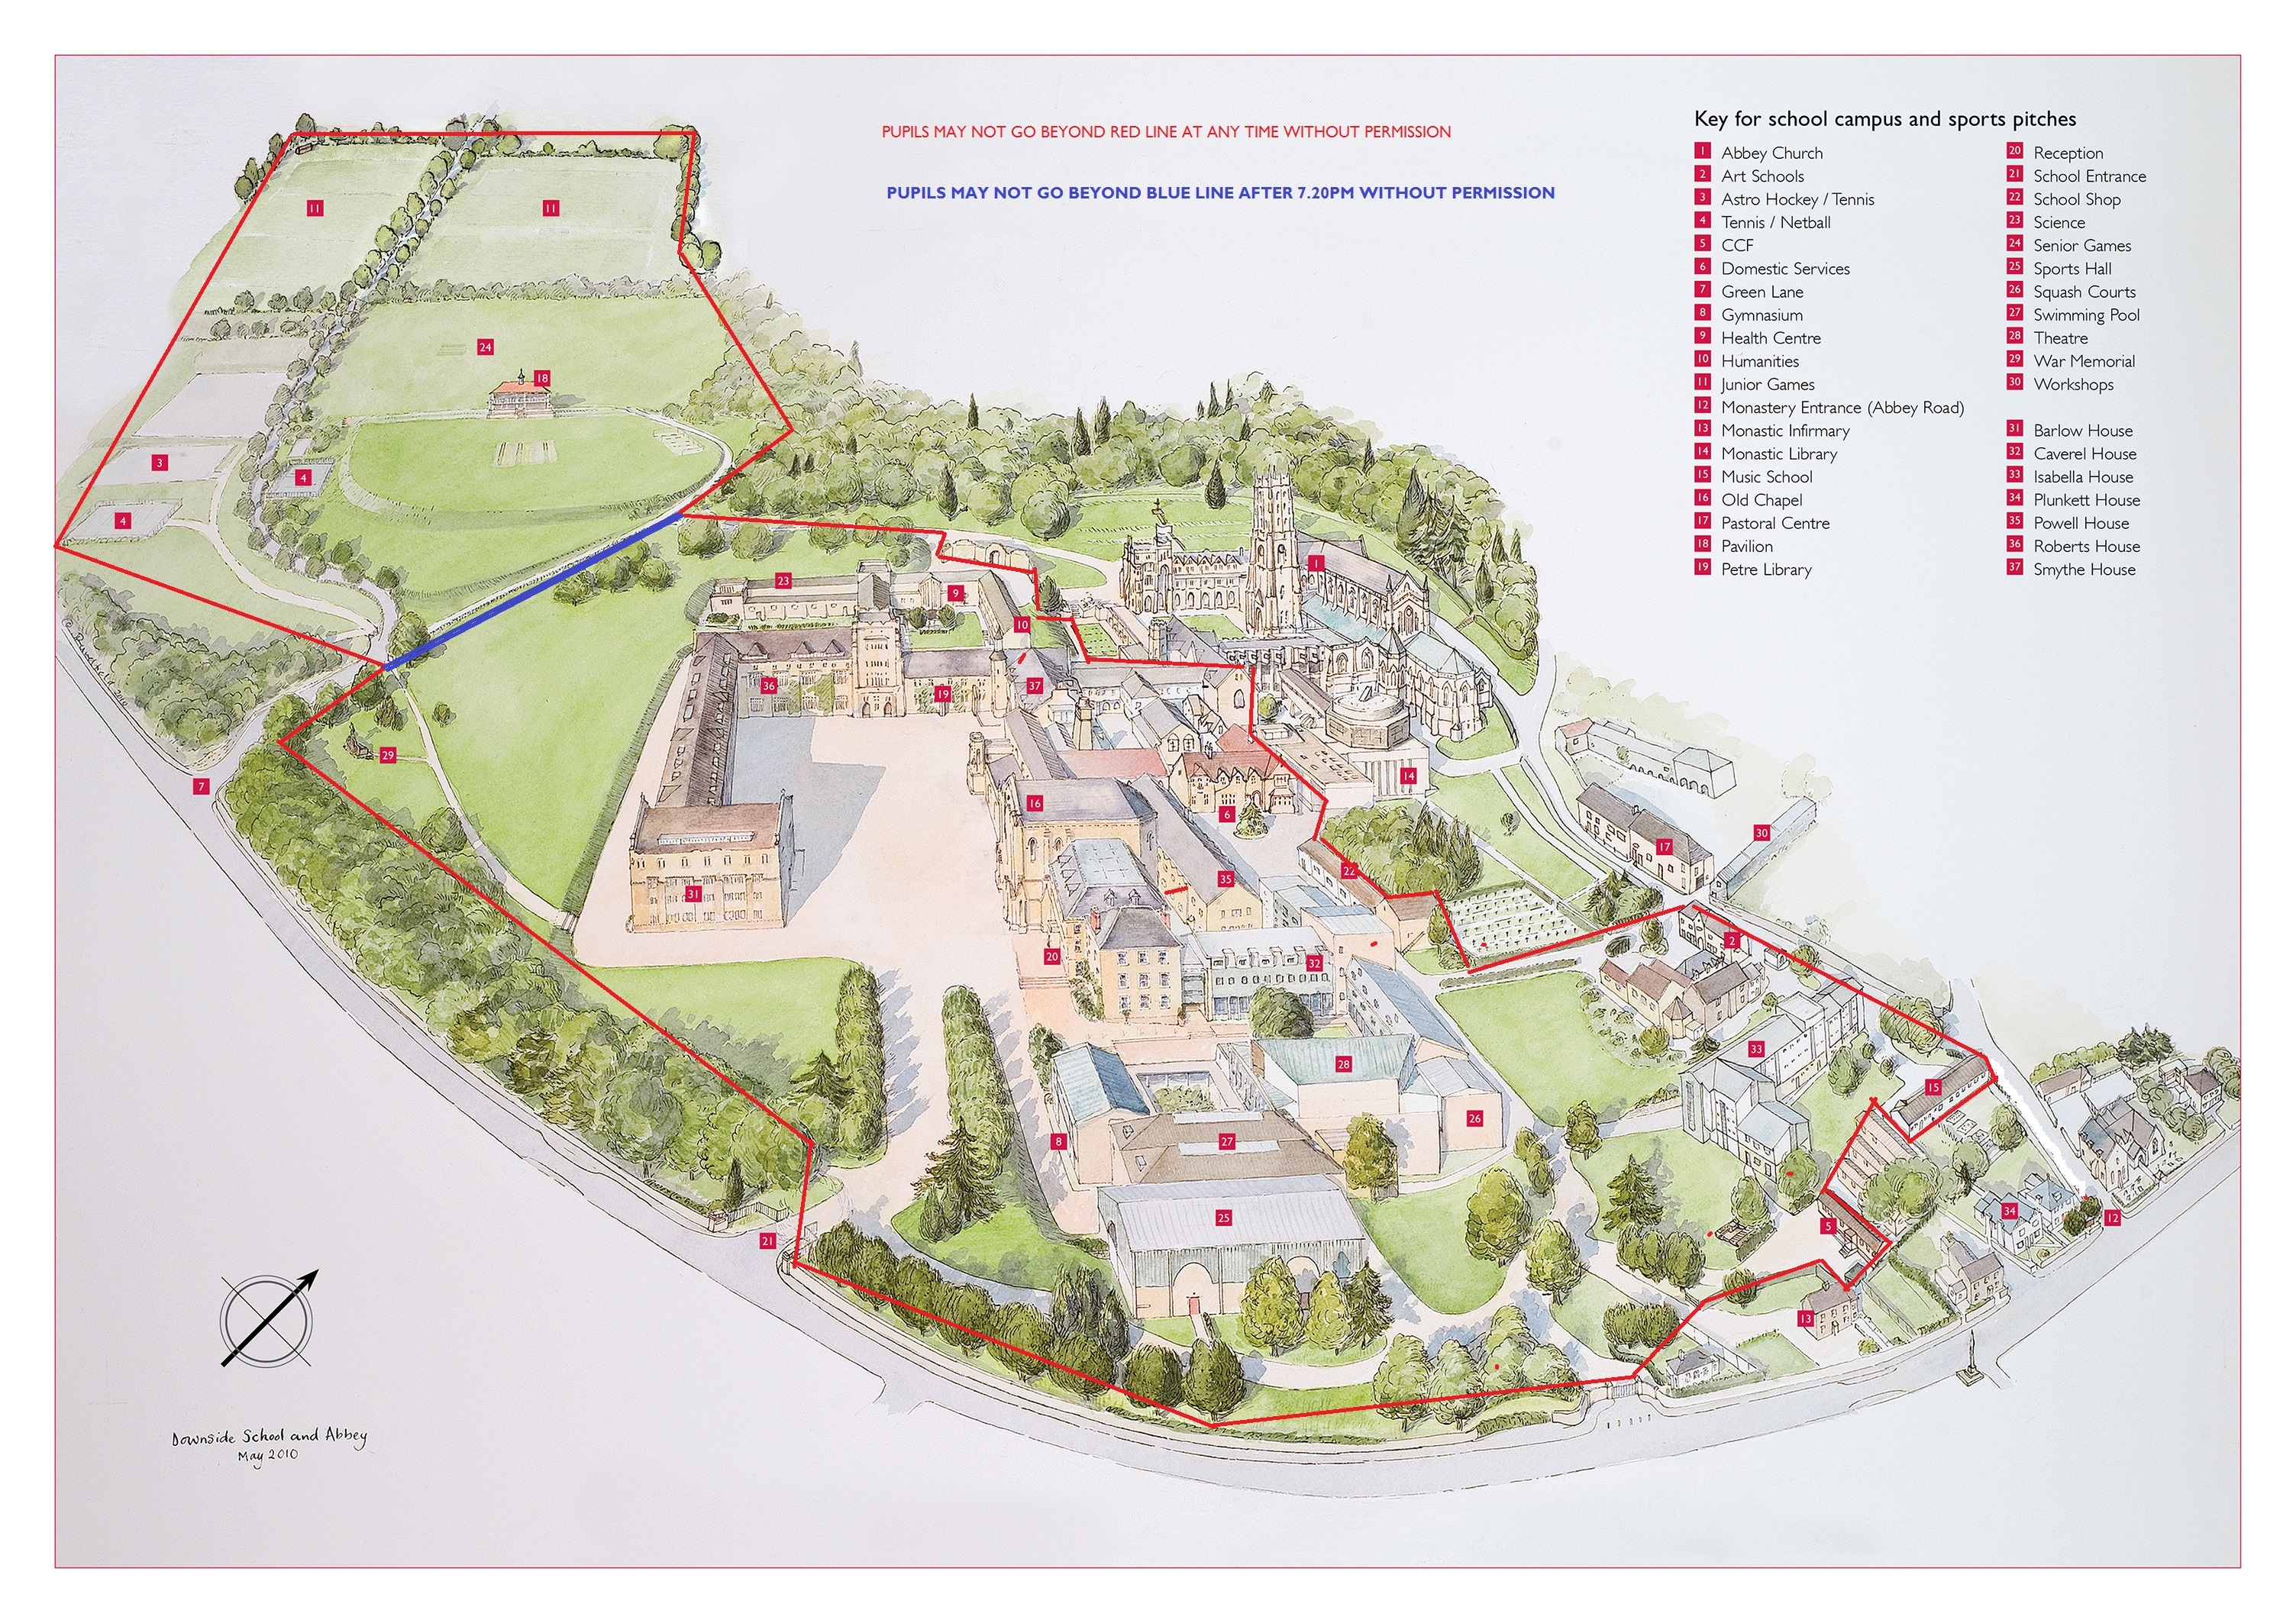 An illustrative map showing the Downside school estate. The legend identifies school buildings and sports pitches